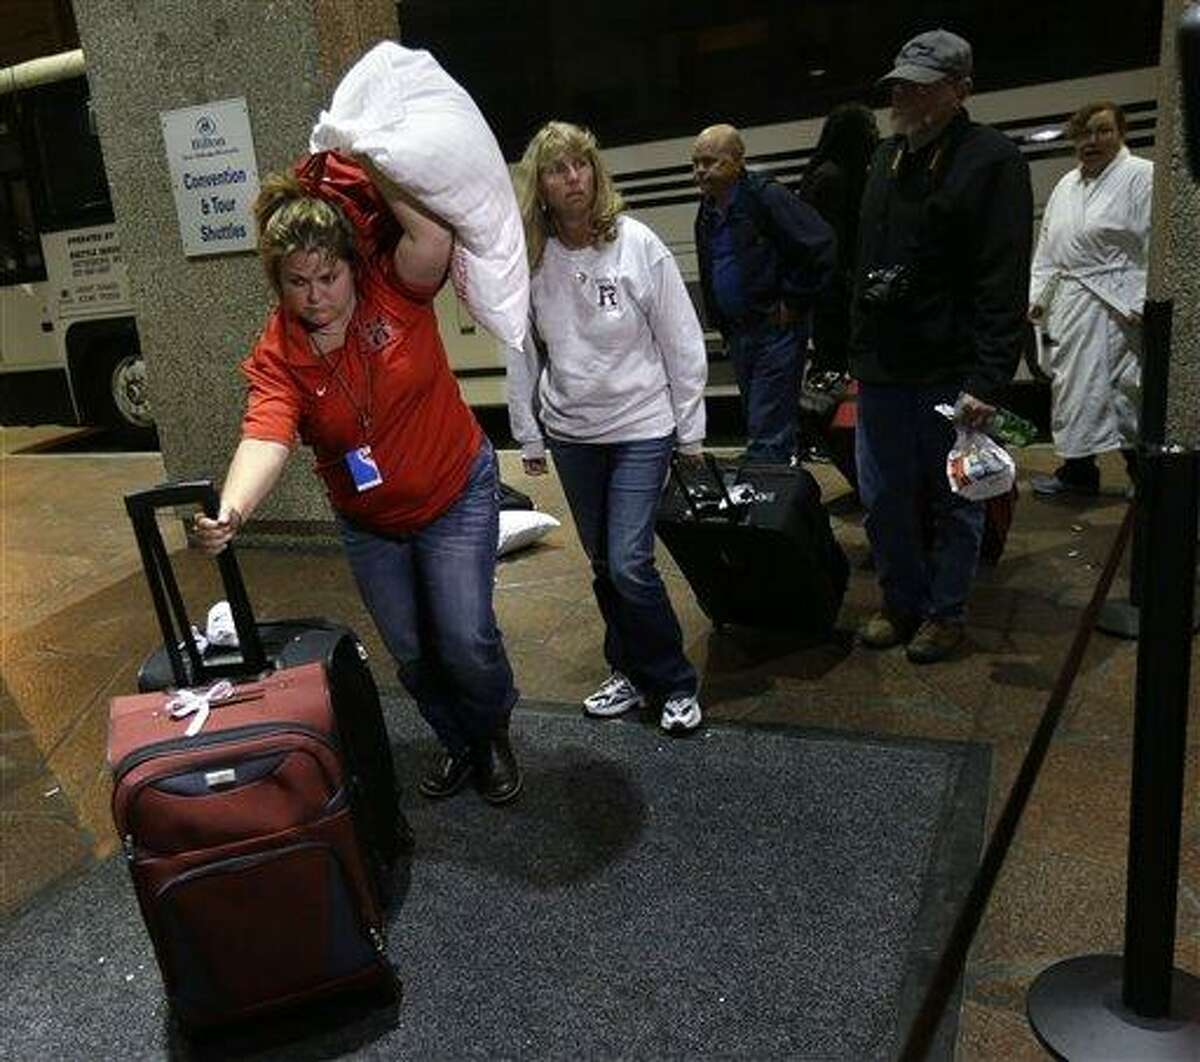 Passengers from the disabled Carnival Triumph cruise ship arrive by bus at the Hilton Riverside Hotel in New Orleans, Friday, Feb. 15, 2013. The ship had been idled for nearly a week in the Gulf of Mexico following an engine room fire. (AP Photo/Gerald Herbert)